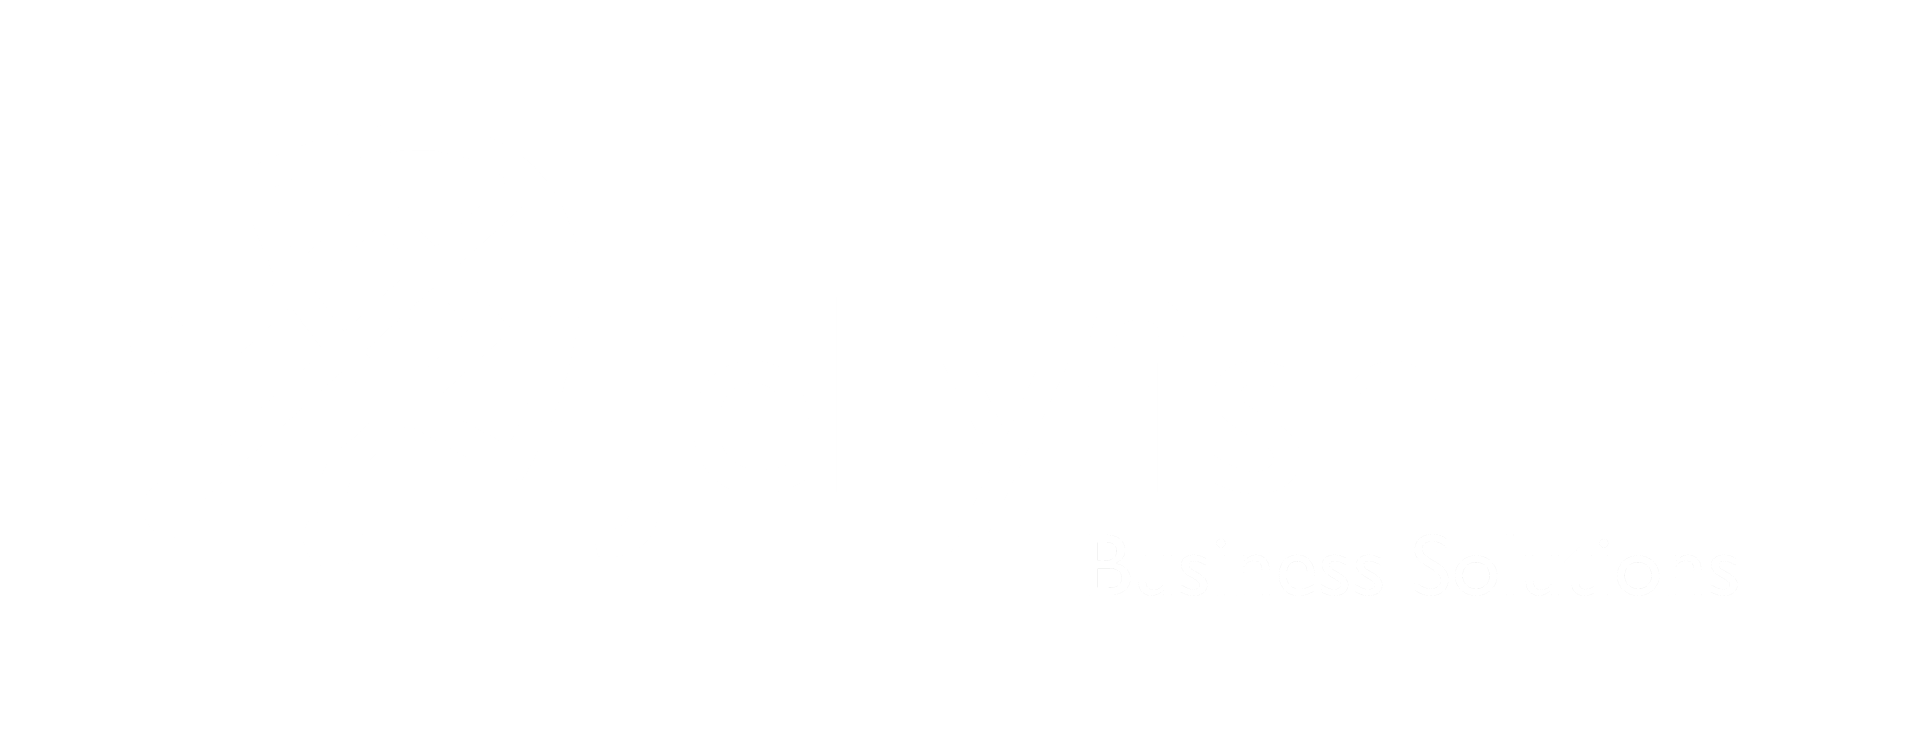 Jellyfish Business Solution